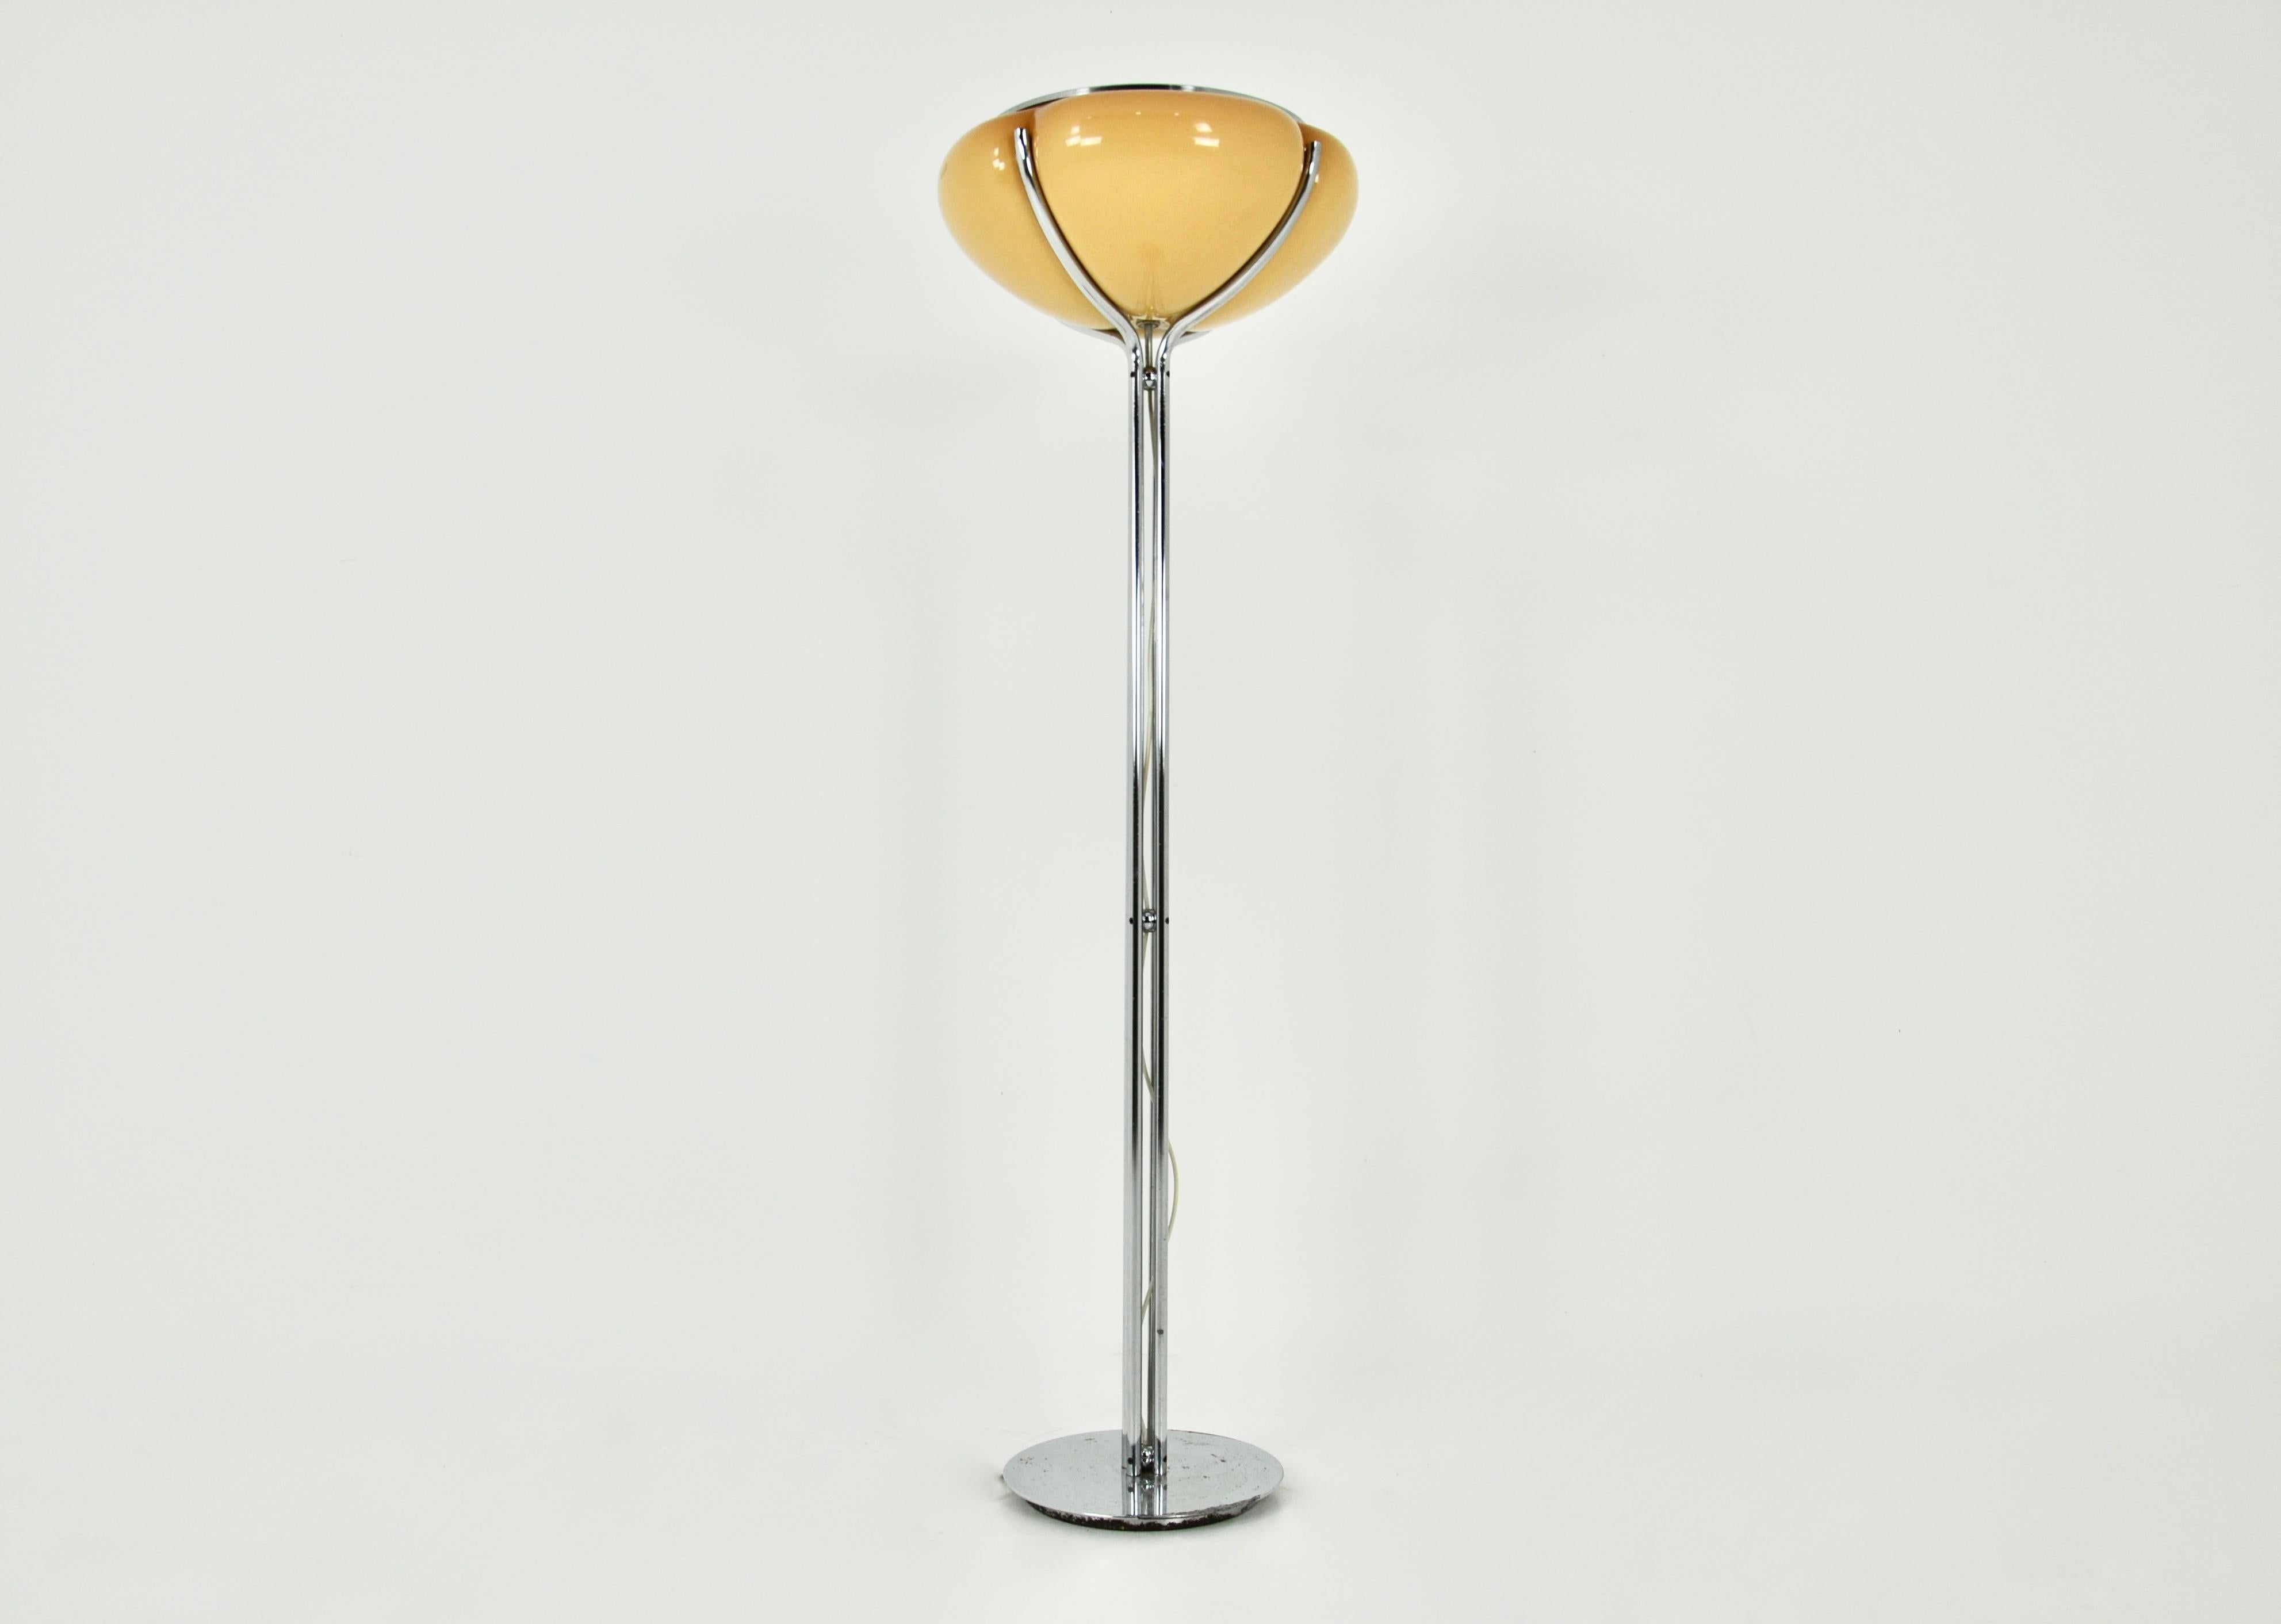 Floor lamp in plastic and metal, orange and chrome, designed by Gae Aulenti for Harvey Guzzini. Stamped Harvey Guzzini. Wear due to time and age of the lamp.